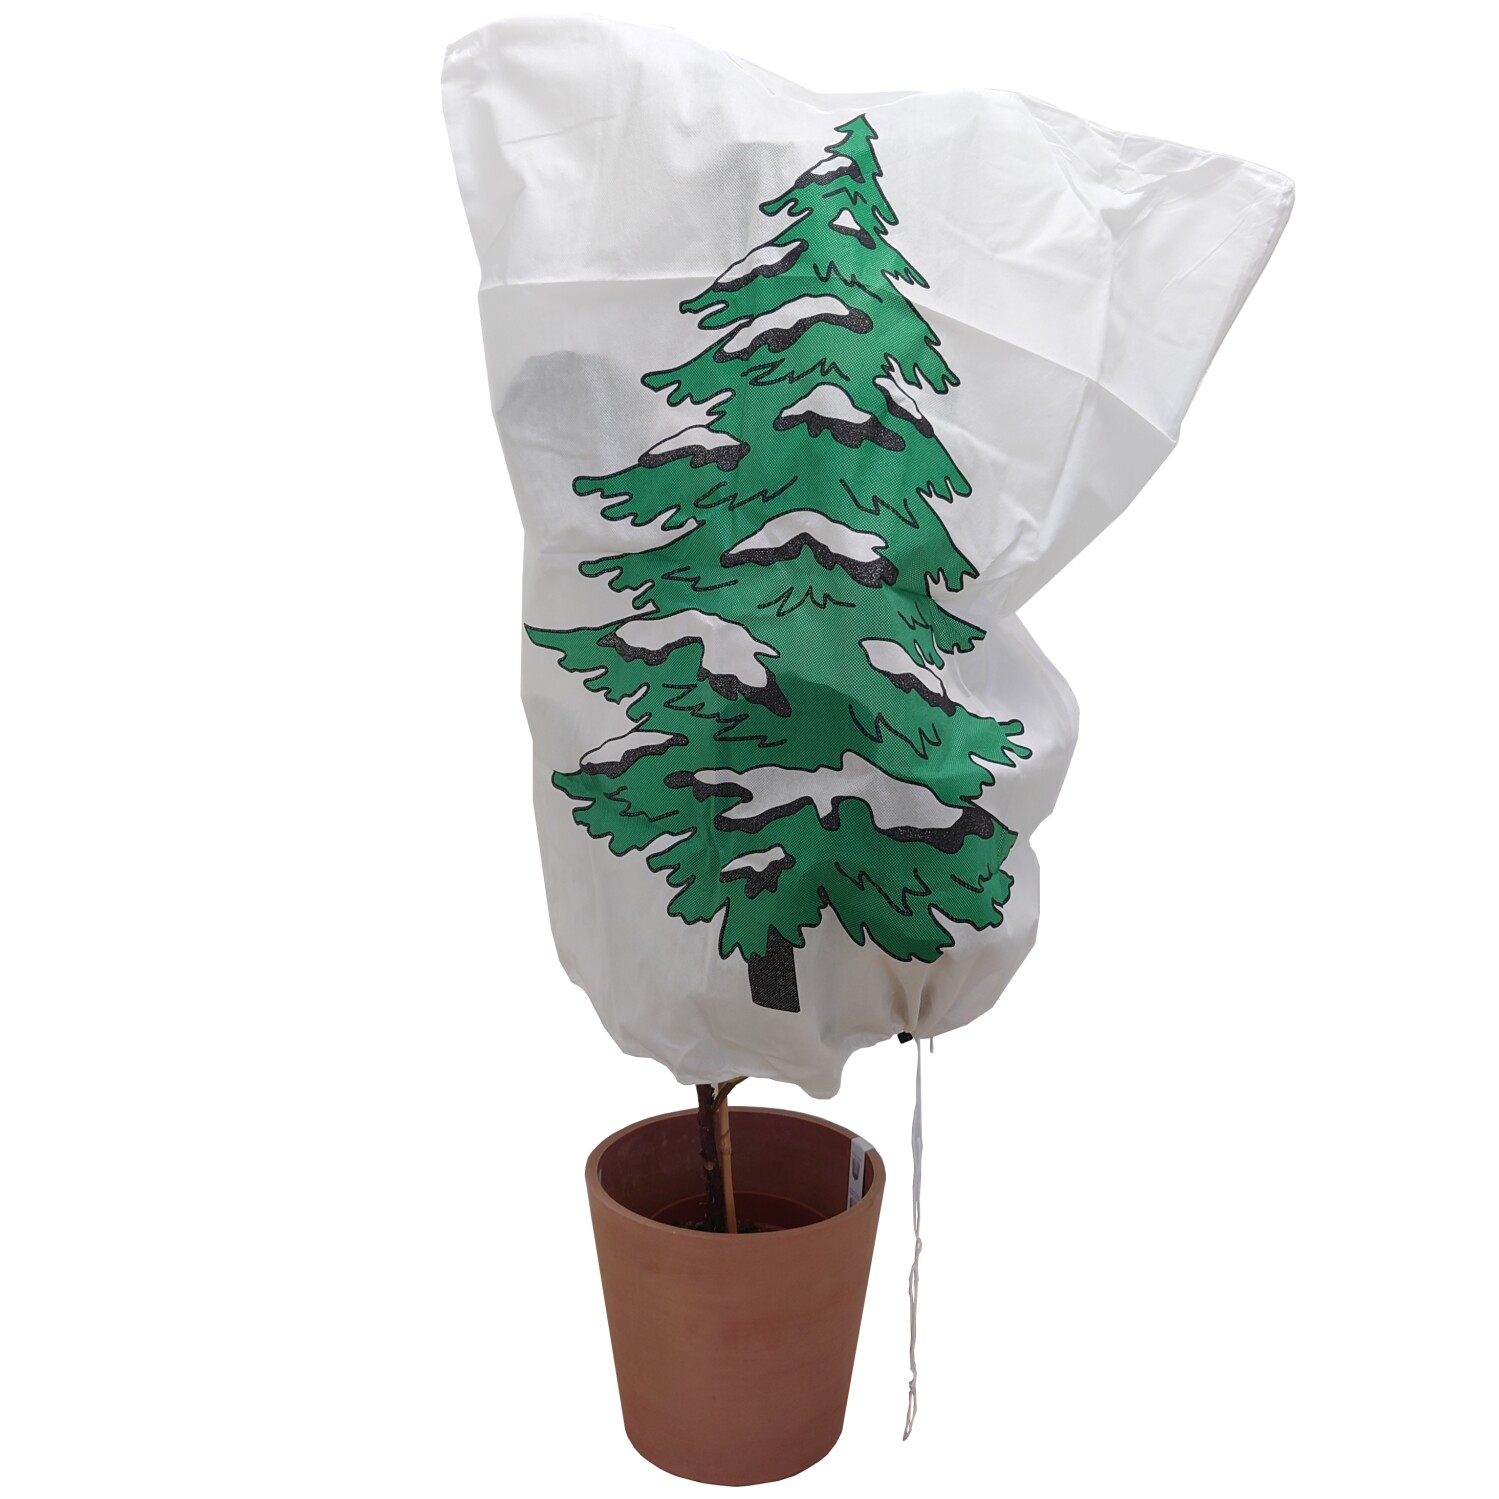 Vorsthoes CUPA Pinetree 08 x 1 m dennenboomprint